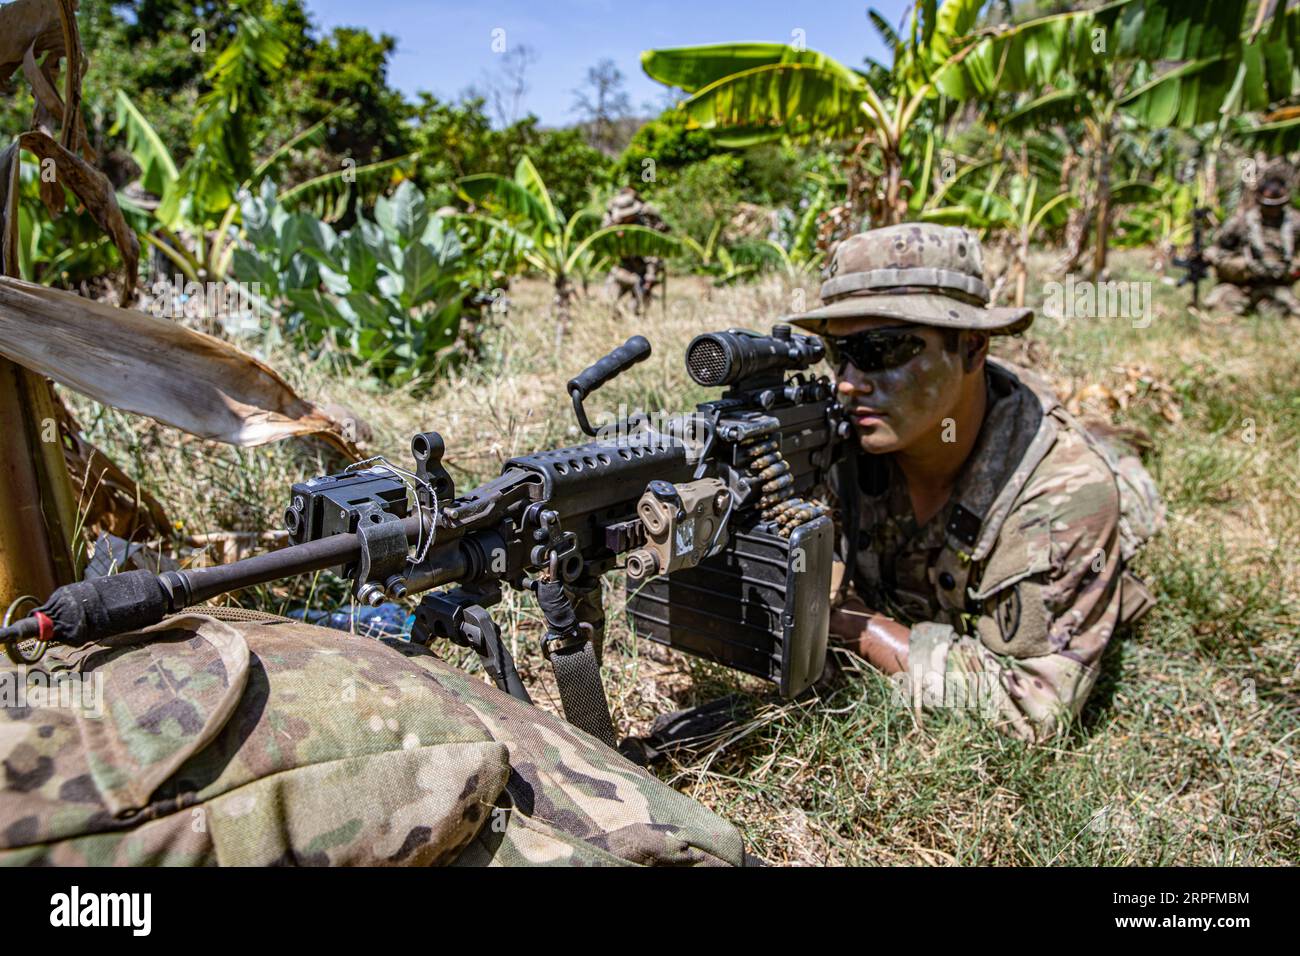 Puslatpur, Indonesia. 04th Sep, 2023. A U.S. Army soldier assigned to Bravo Company Borzoi, 25th Infantry Division, looks through his M249 squad automatic weapon during jungle maneuvers with Indonesian National Armed Forces Marines at exercise Super Garuda Shield 2023, September 4, 2023 in Puslatpur, Indonesia. Credit: Sfc Ausitn Berner/US Army/Alamy Live News Stock Photo